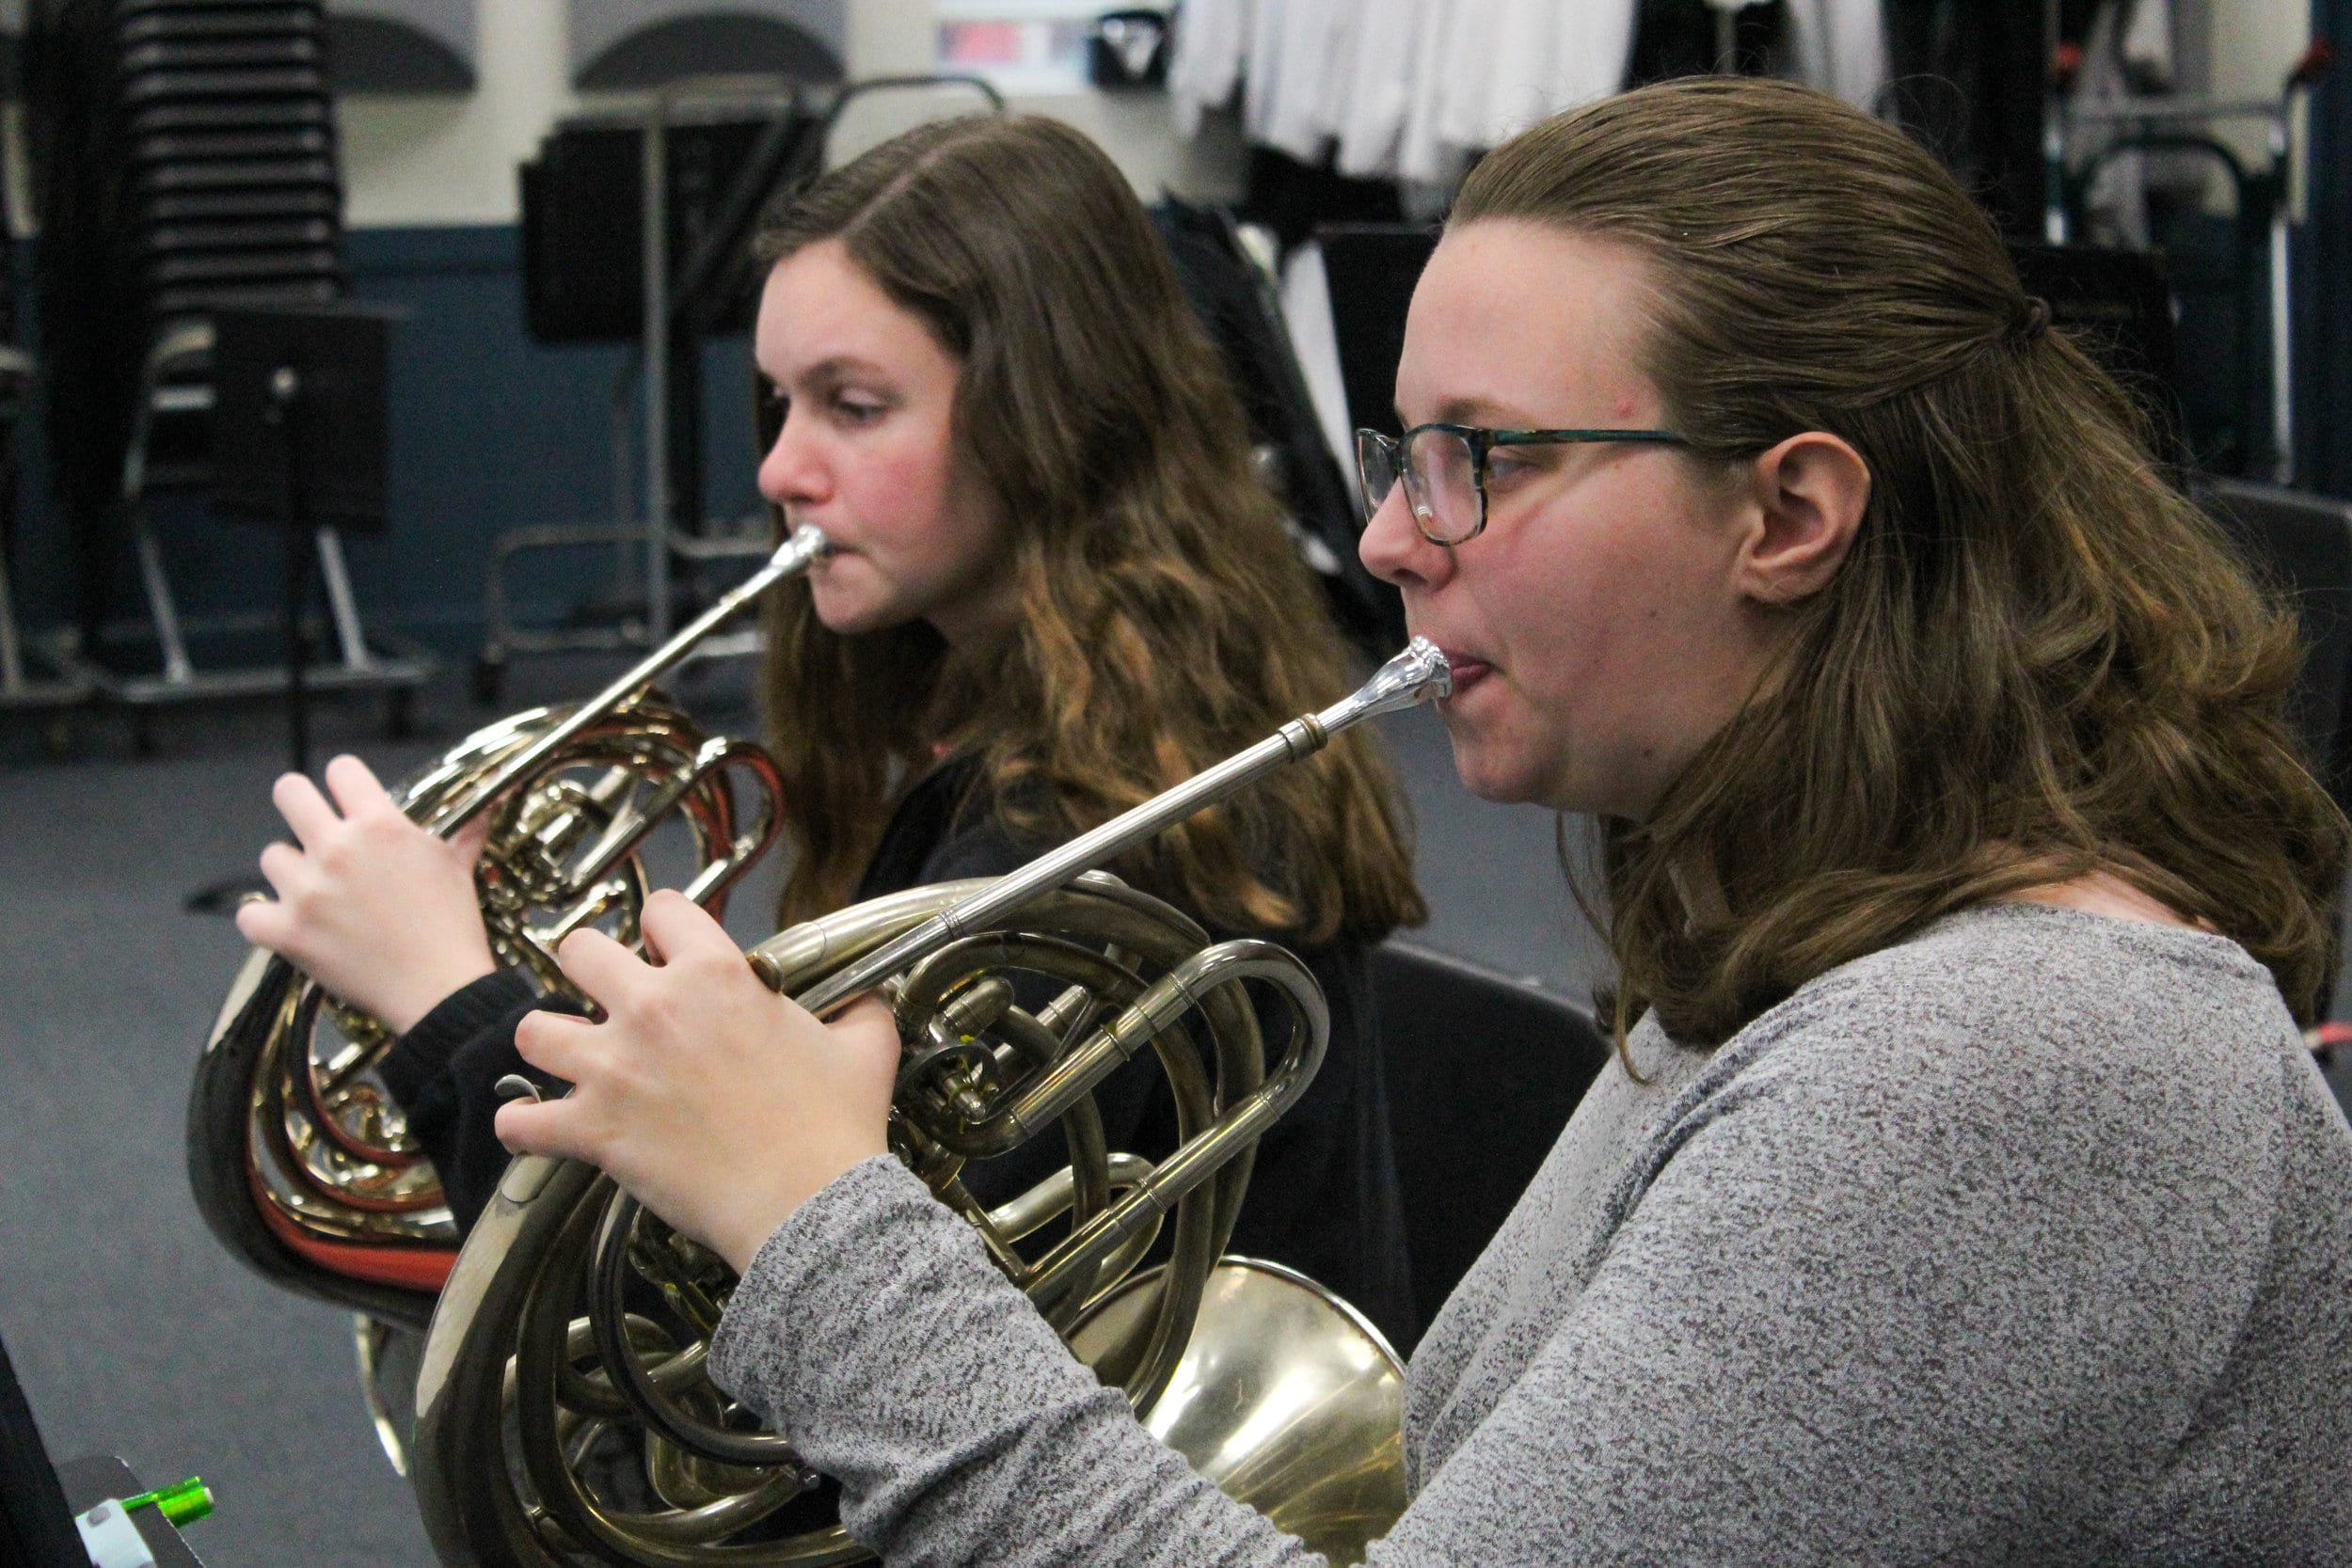 The two orchestra students practice playing their horns.